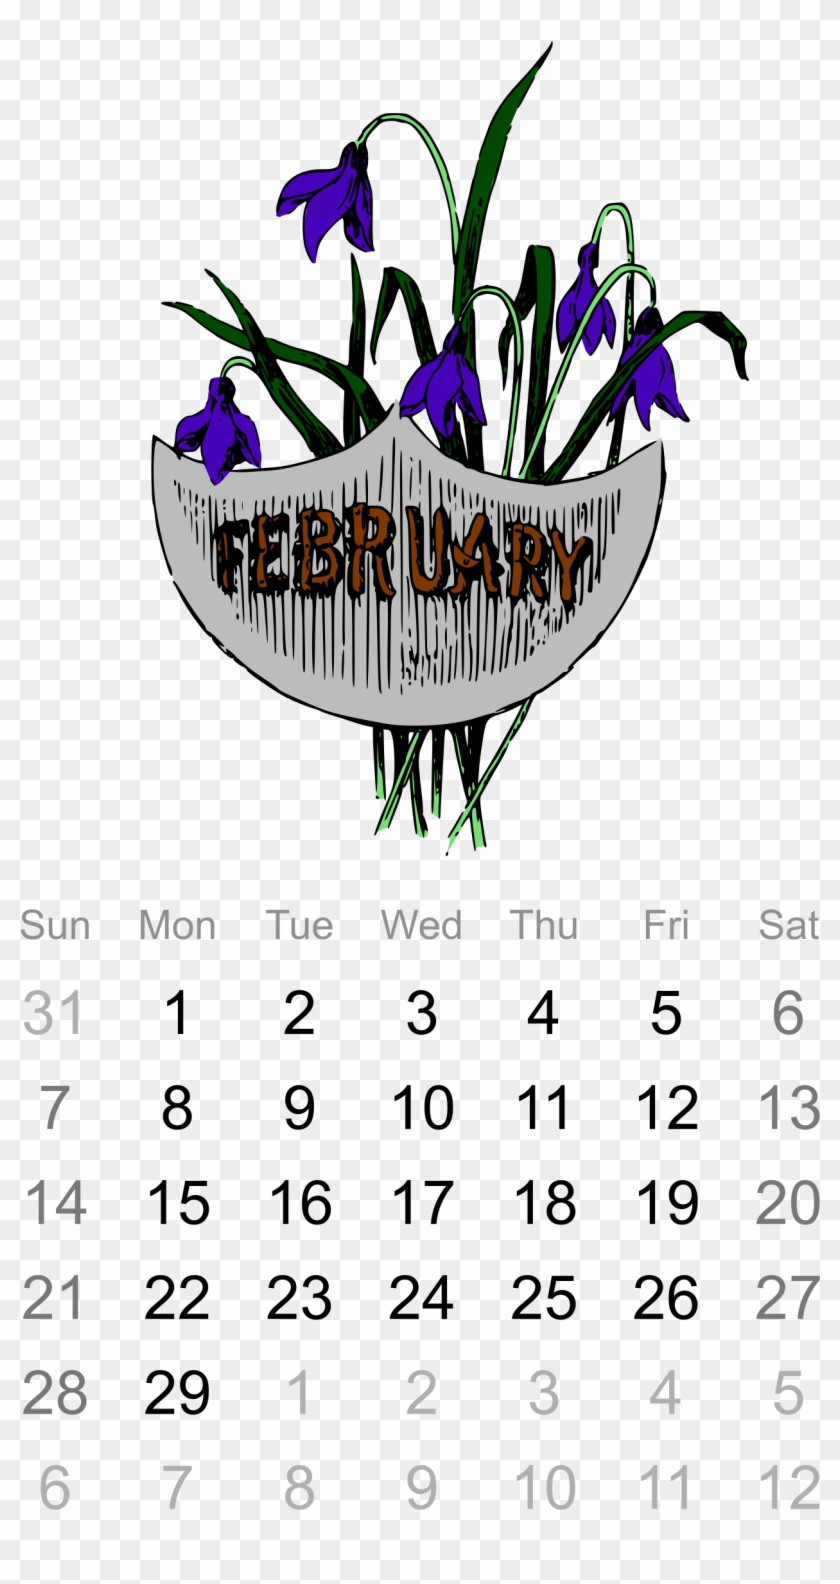 This Free Icons Png Design Of 2016 February Calendar Clipart #899107